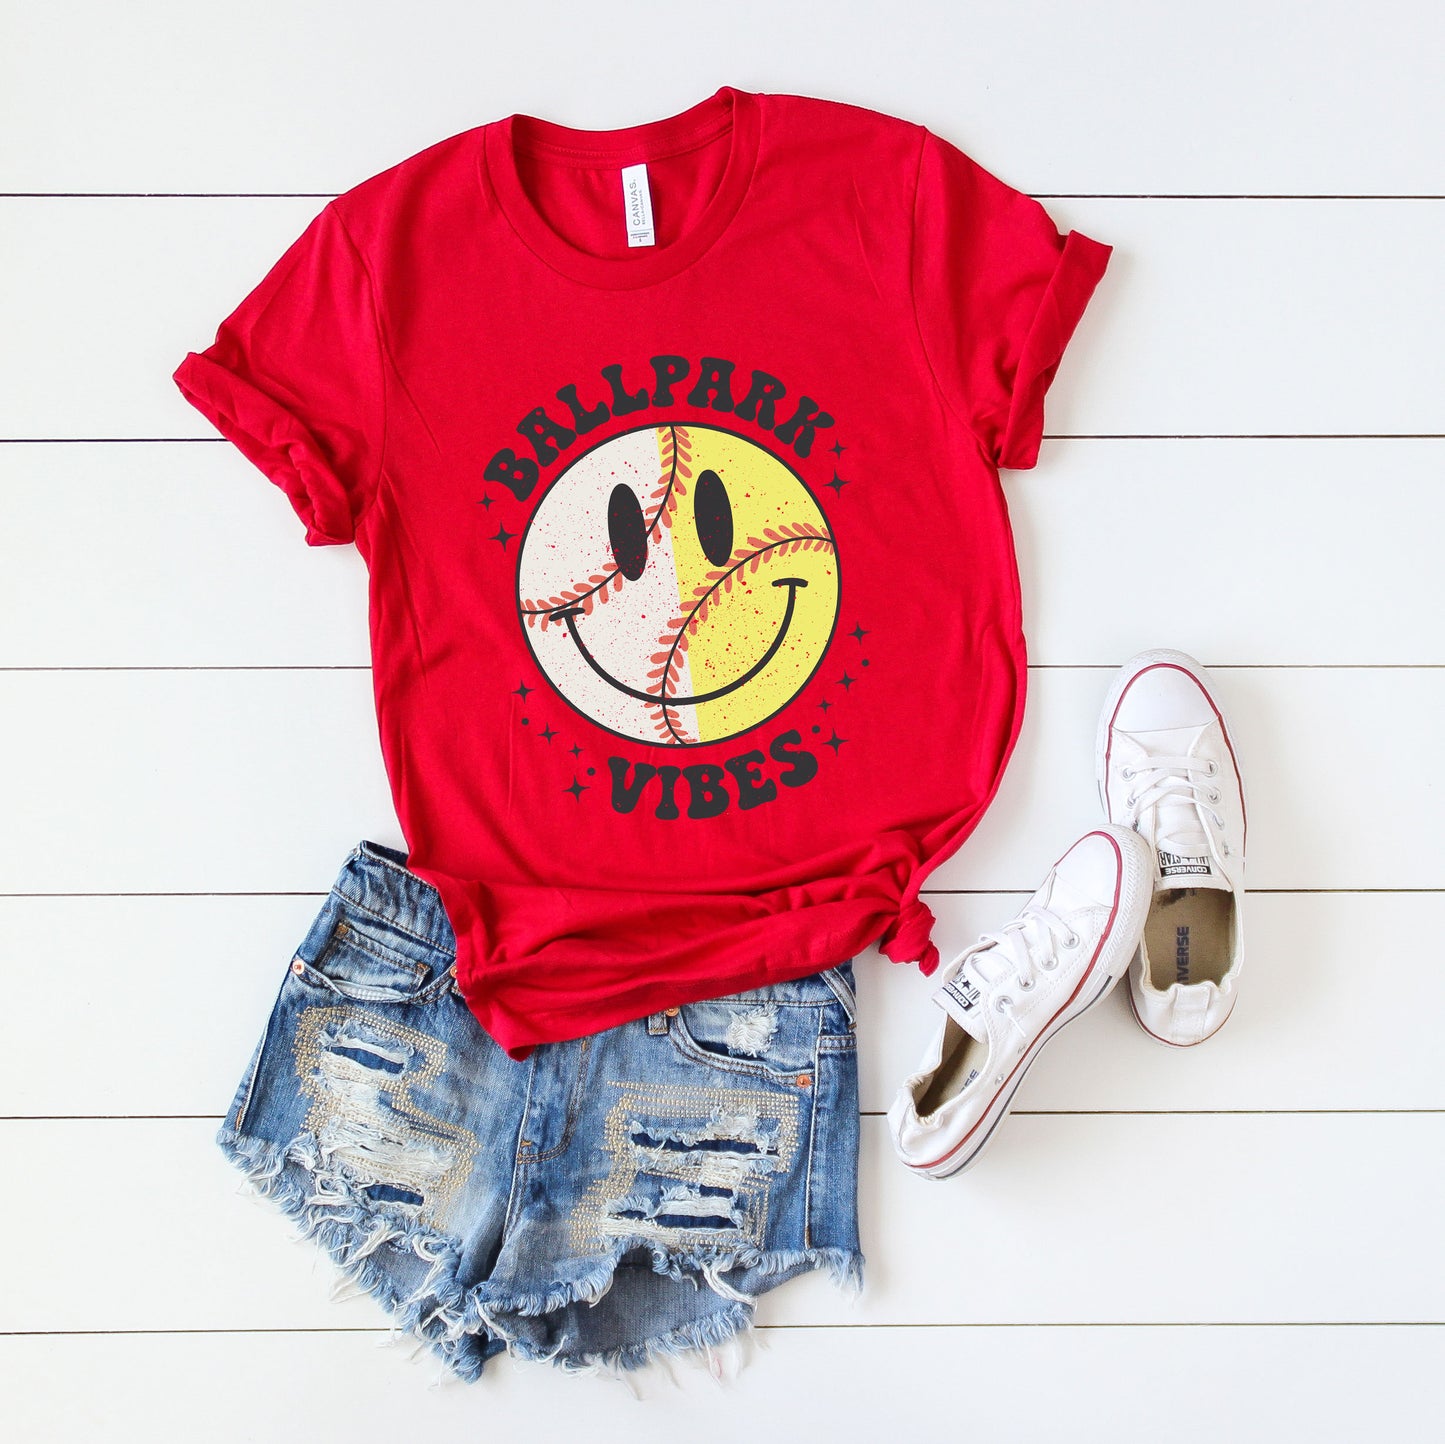 Vintage Ballpark Vibes Smiley Face | Short Sleeve Graphic Tee